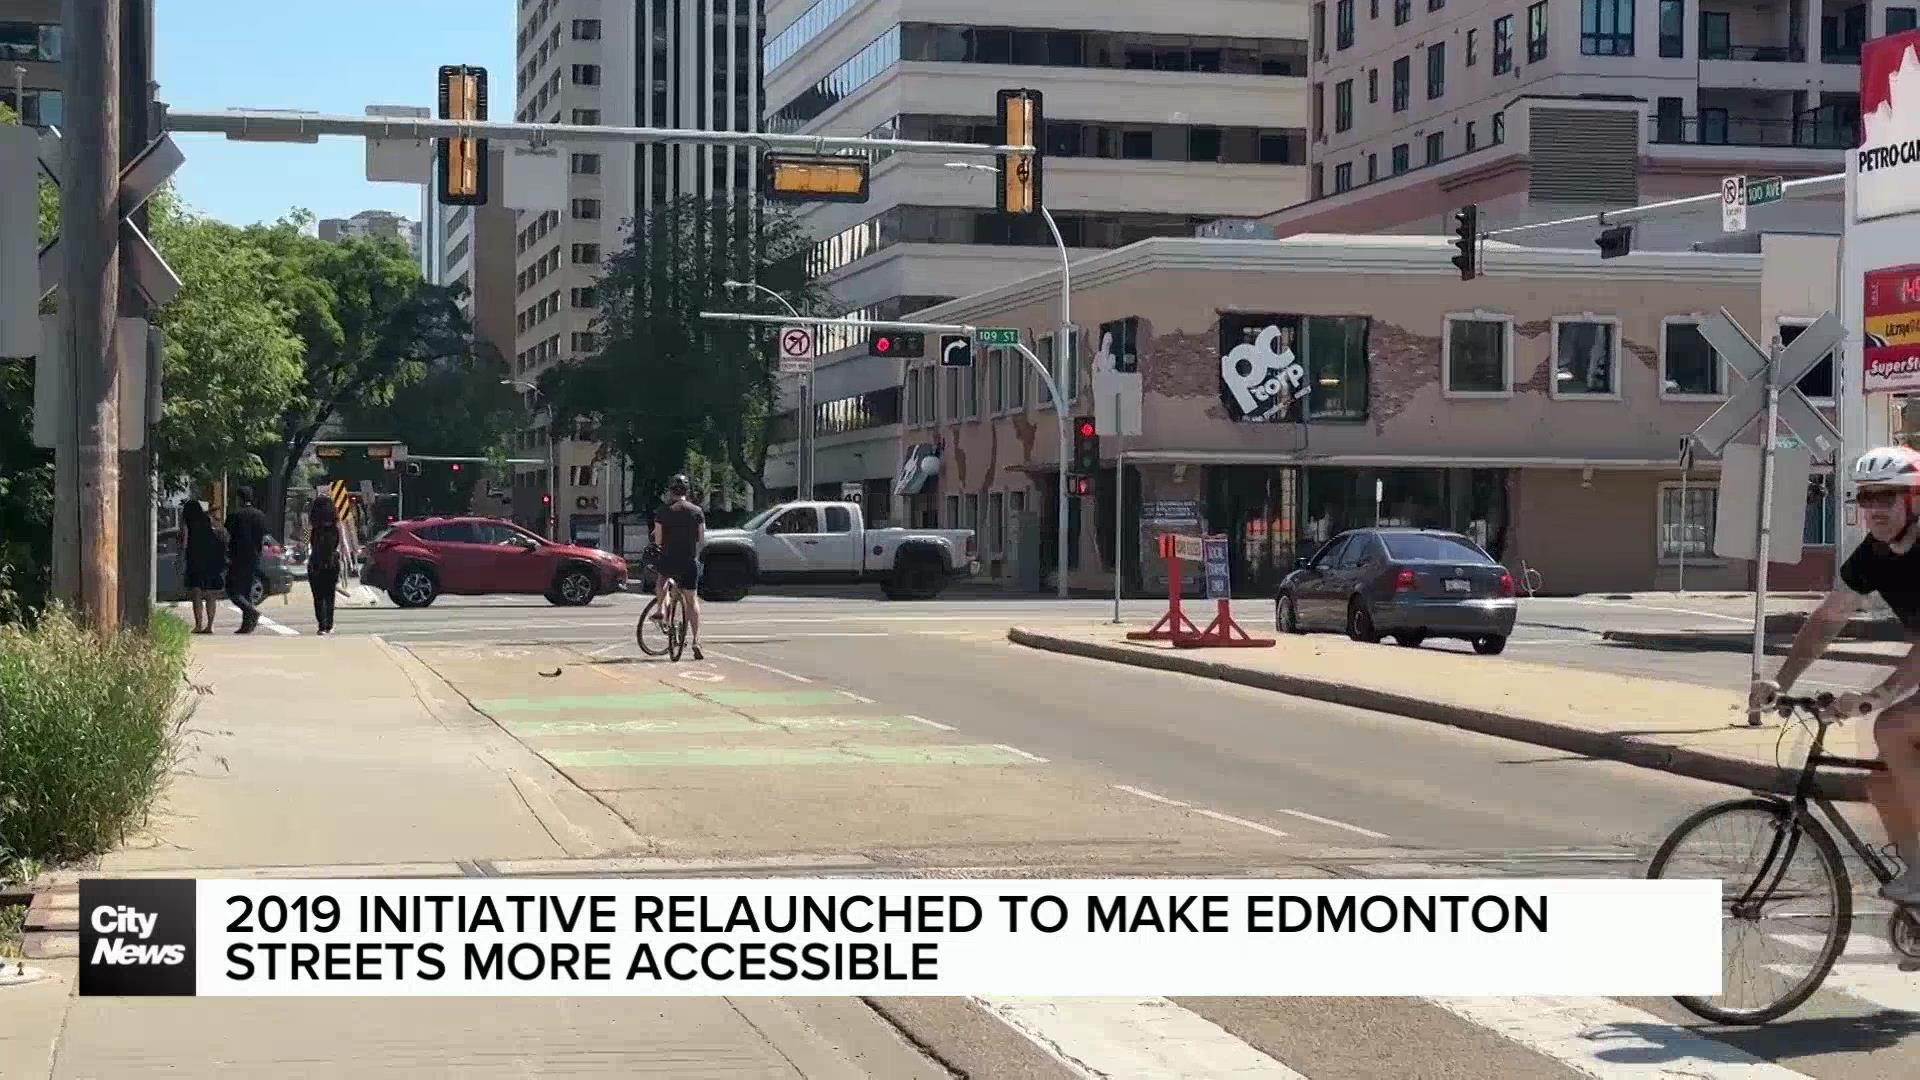 2019 initiative relaunched to make Edmonton more accessible